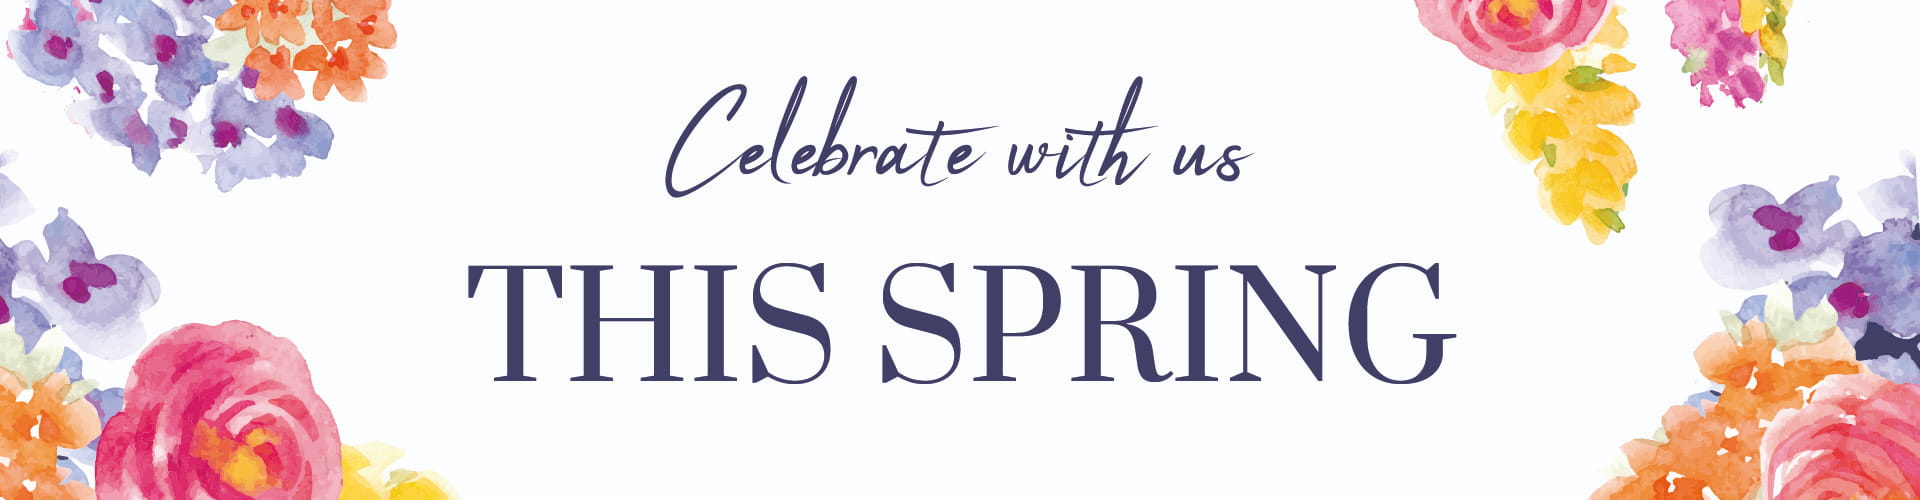 Spring Offers in Leeds | The Midland Hotel